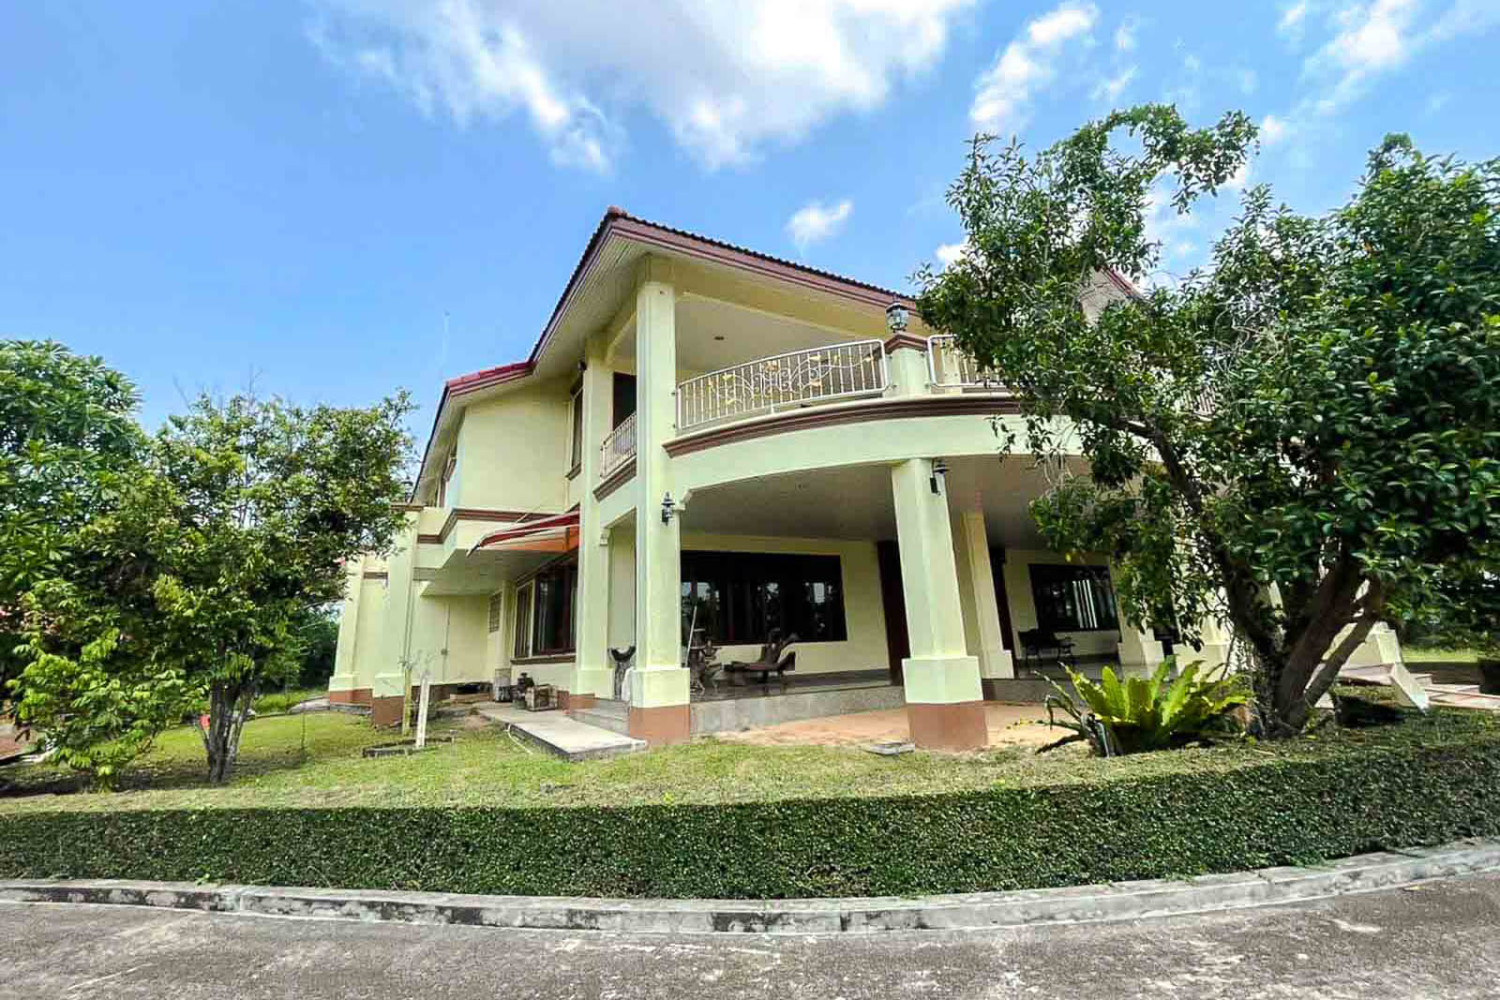 House for sale - 6 Bed 4 Bath image 1